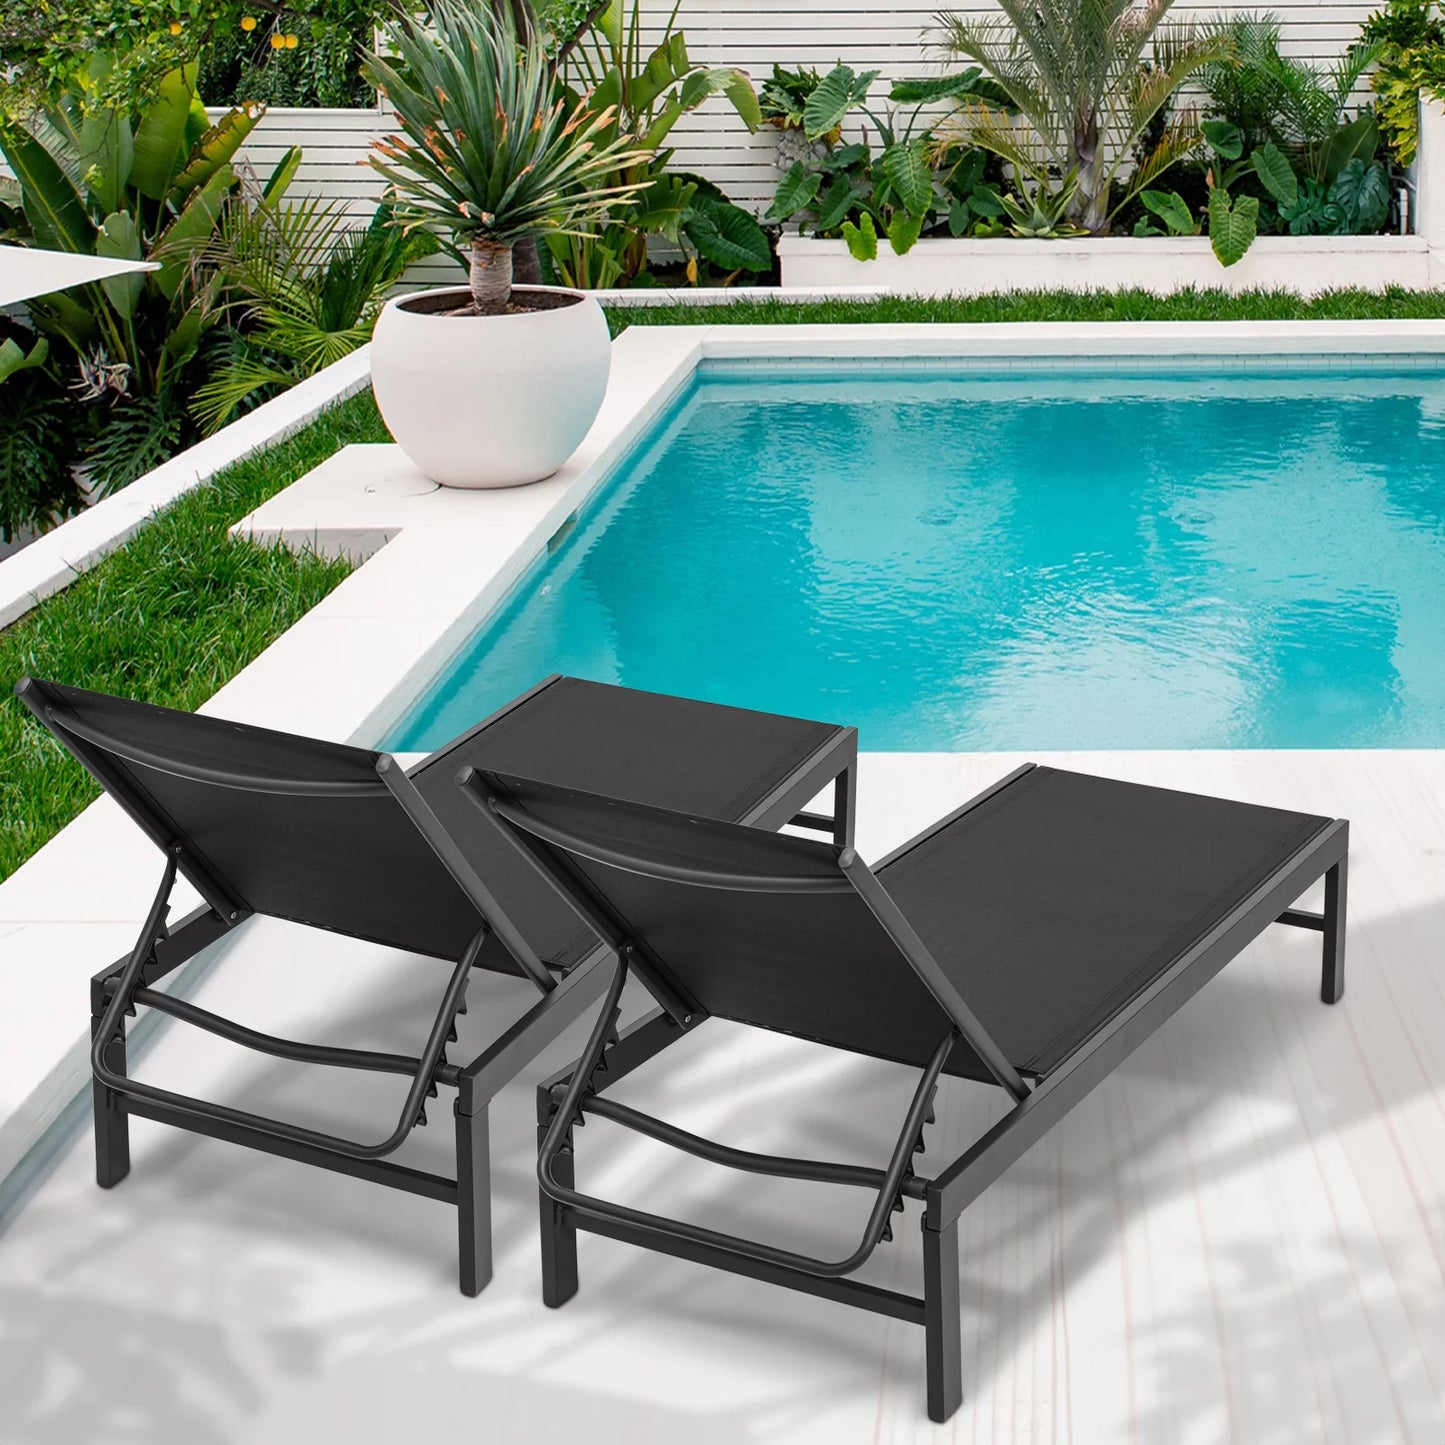 Magshion 2 Piece Outdoor Patio Lounge Chairs with Adjustable Backrest, Pool Recliner Lounge Chaise with Aluminum Frame for Beach Backyard Garden, Black